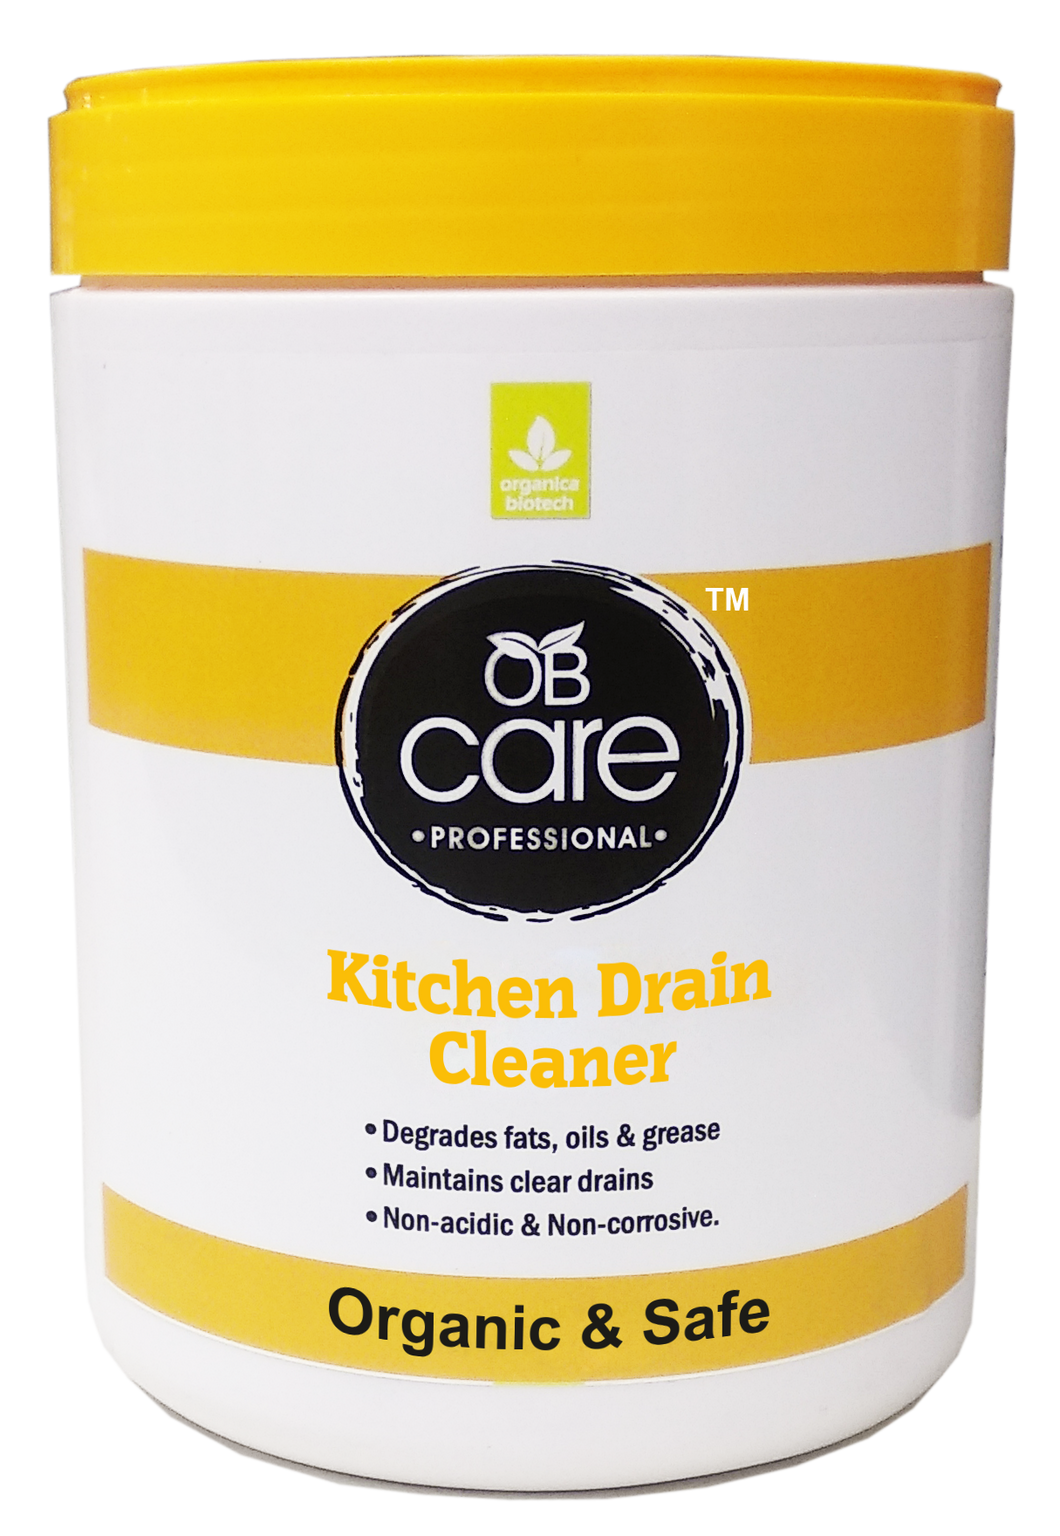 OB Care Kitchen Drain Cleaner Concentrated